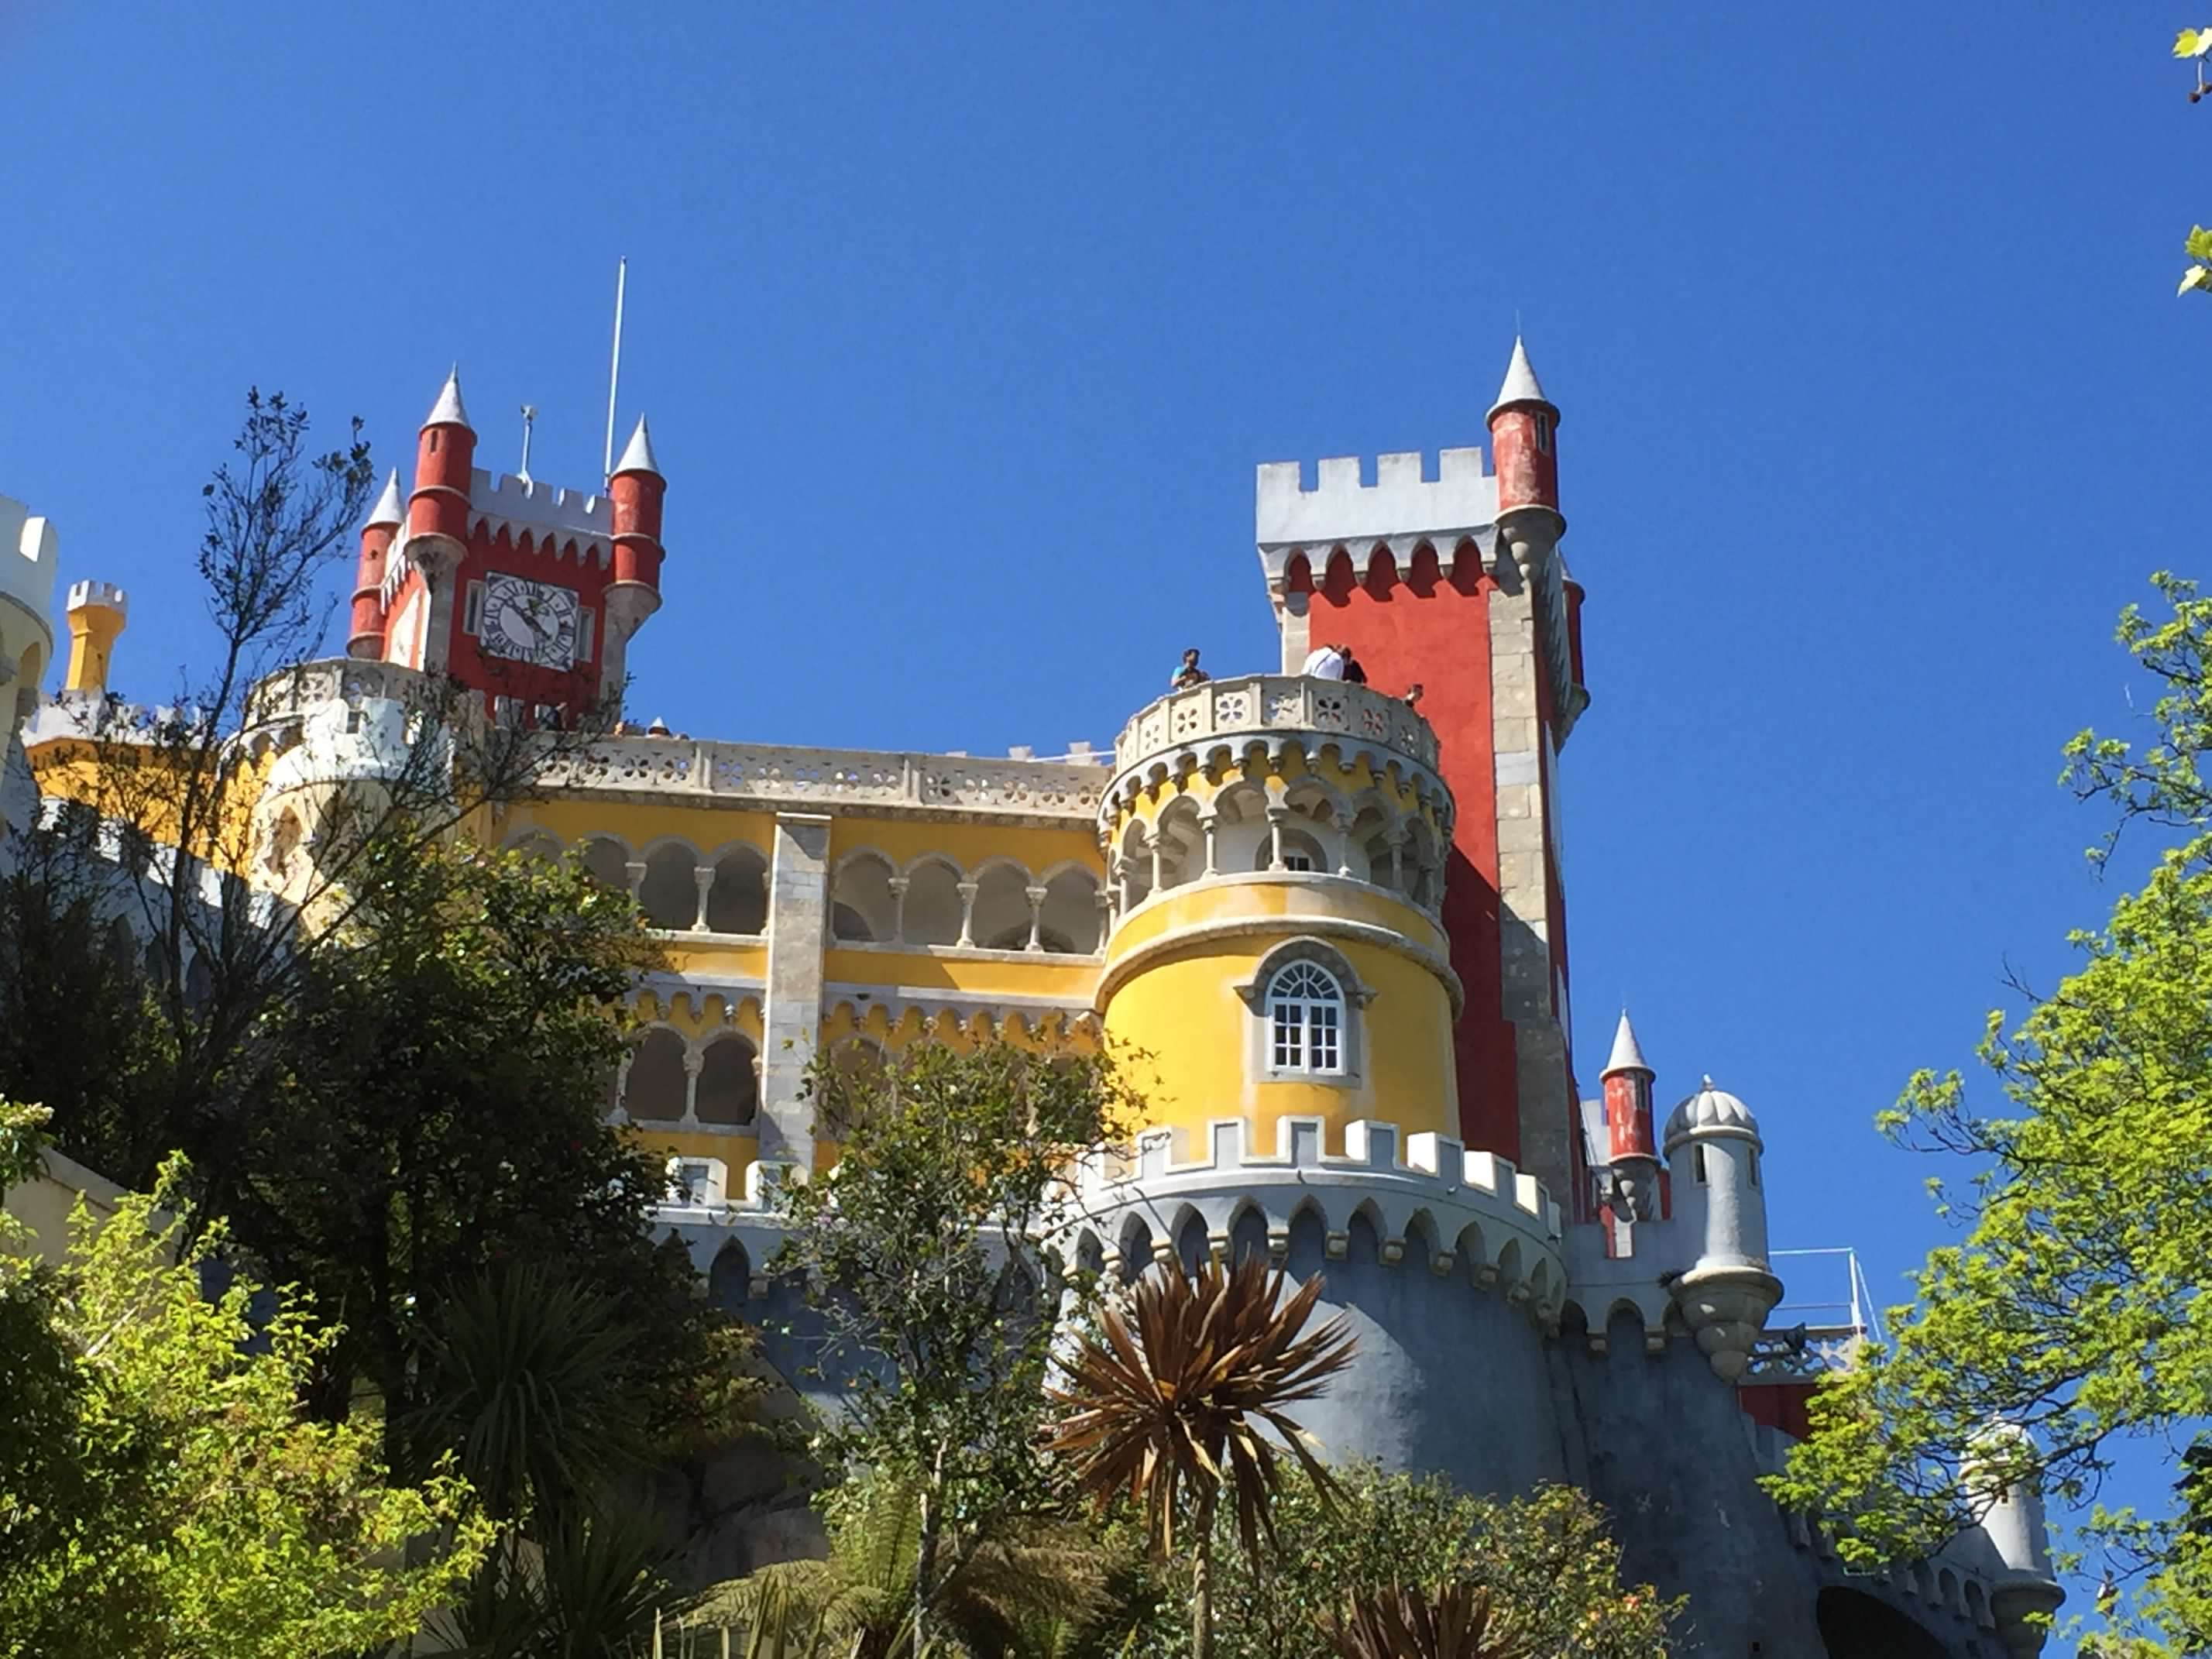 A vibrant view of Pena Palace in Sintra, Portugal, displaying its striking red and yellow towers under a clear blue sky. The palace's whimsical architecture features ornate balconies and crenellated walls, surrounded by lush greenery. This iconic landmark stands out against the natural landscape, creating a fairy-tale-like scene.